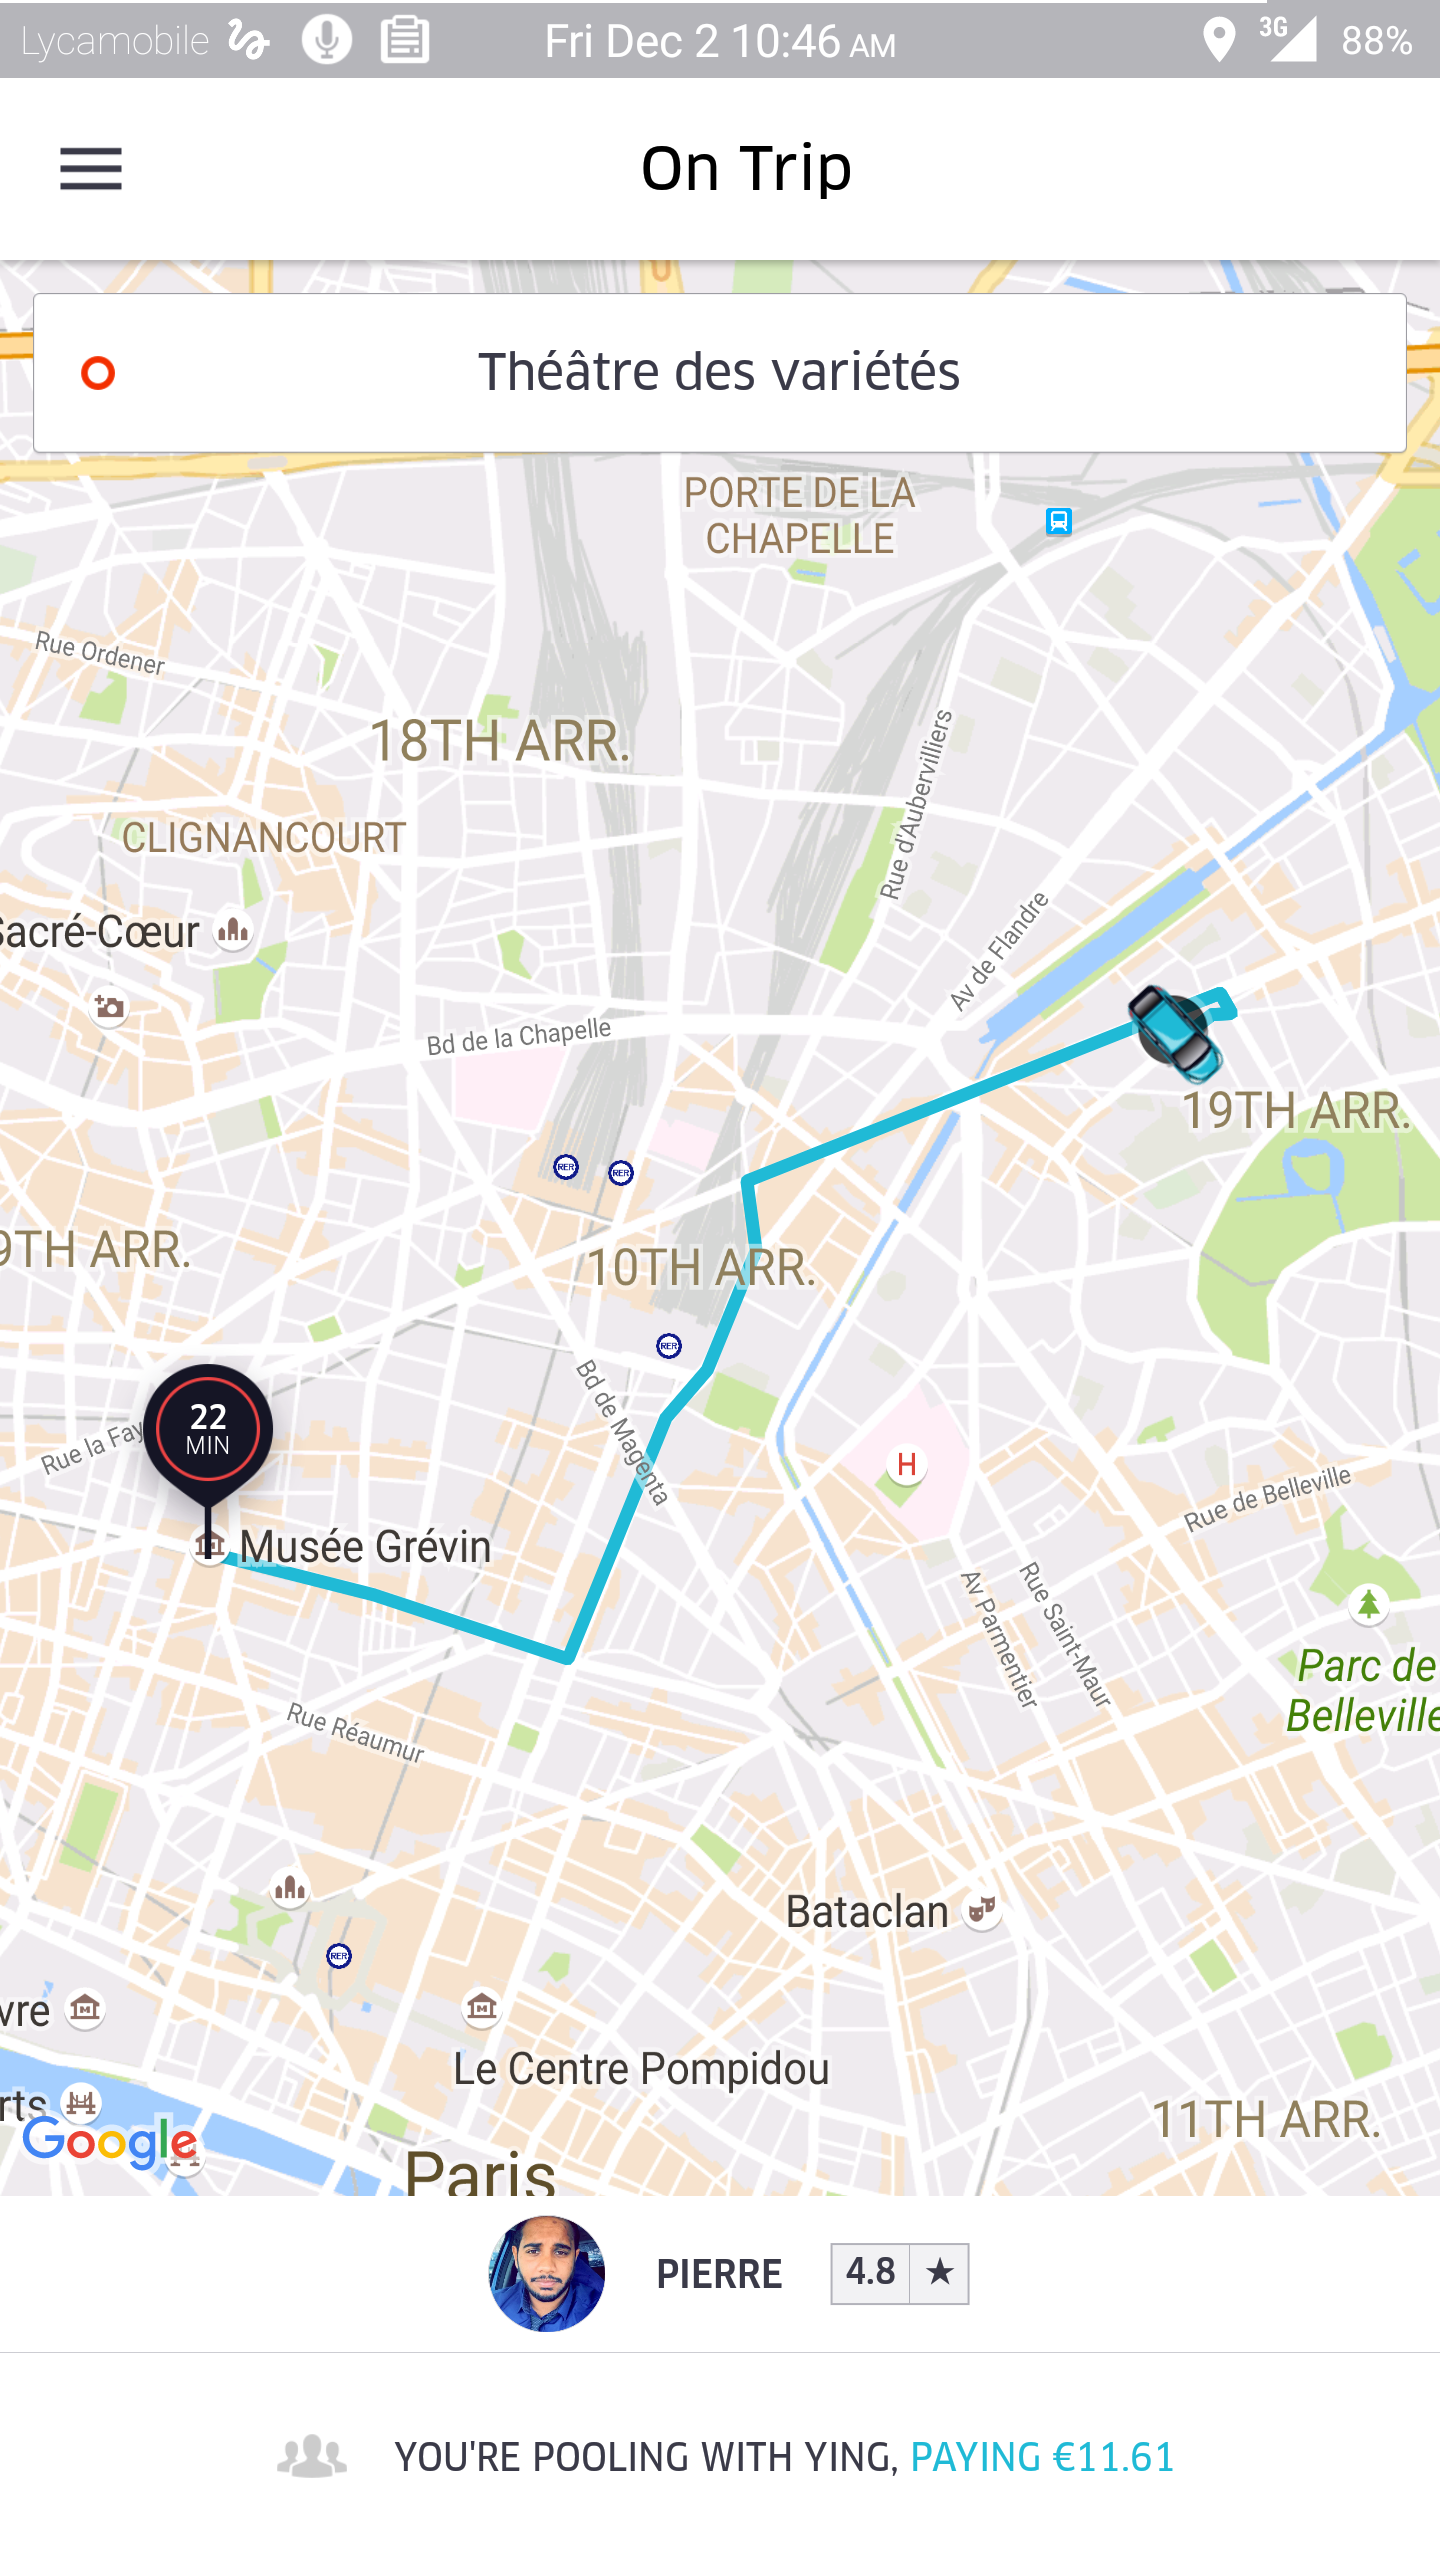 Uber App for Android Screenshot, costing 11.61 euros